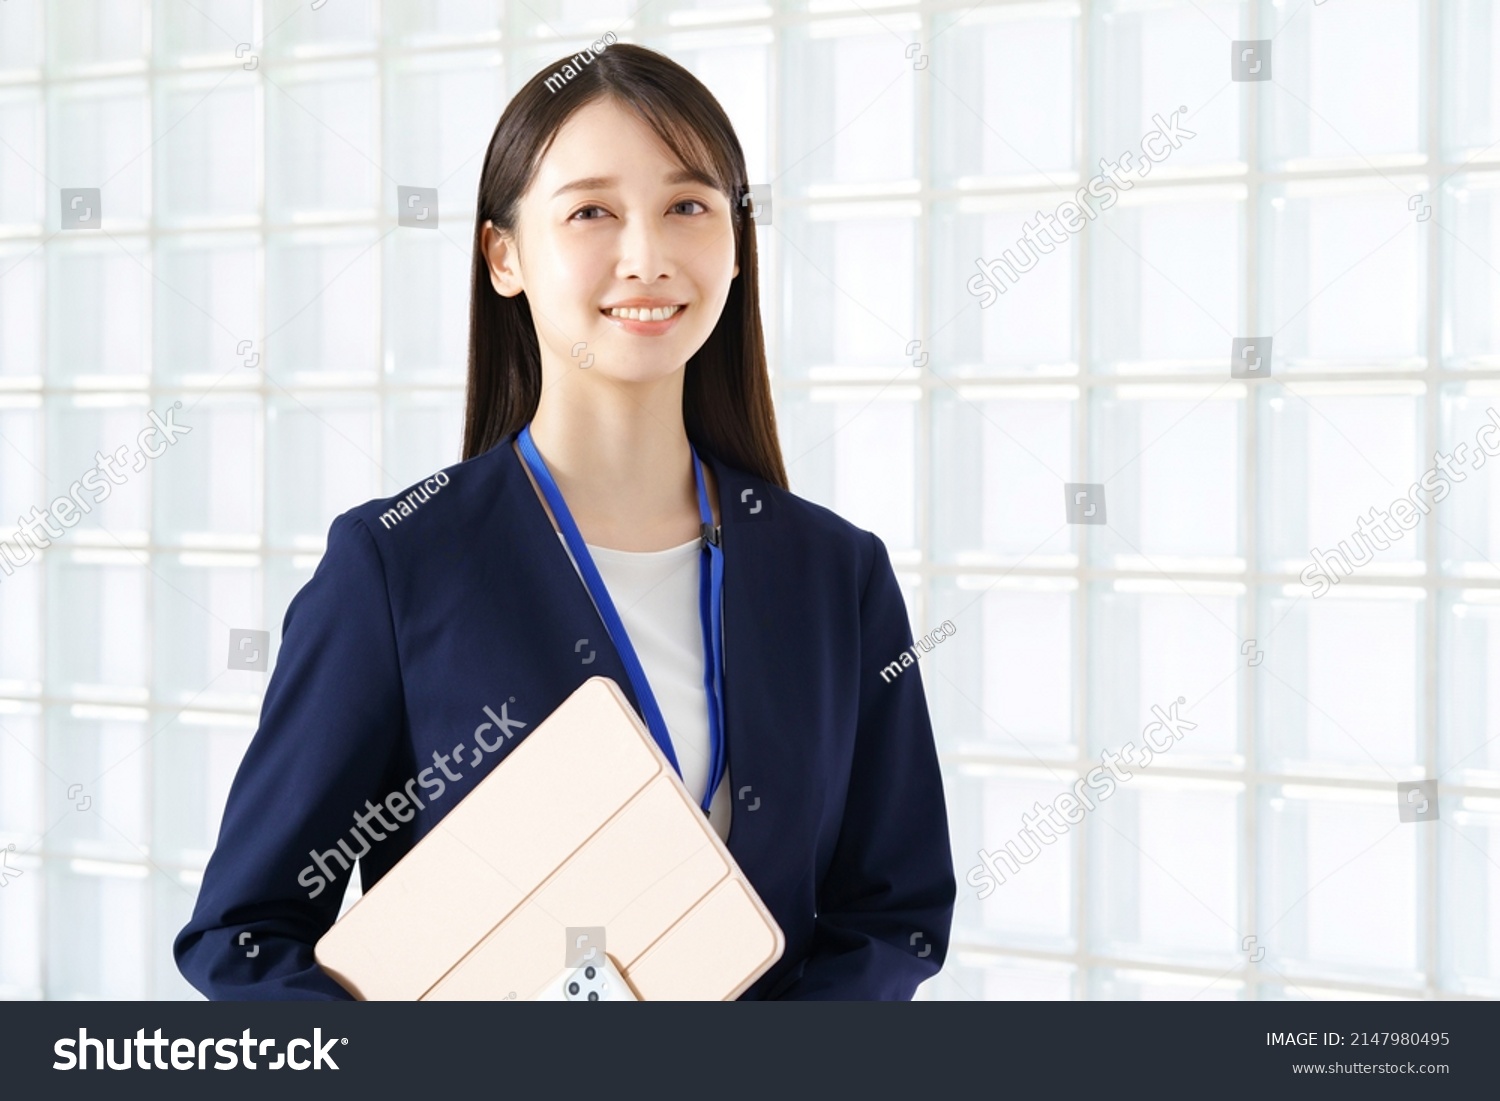 Young woman in a suit #2147980495